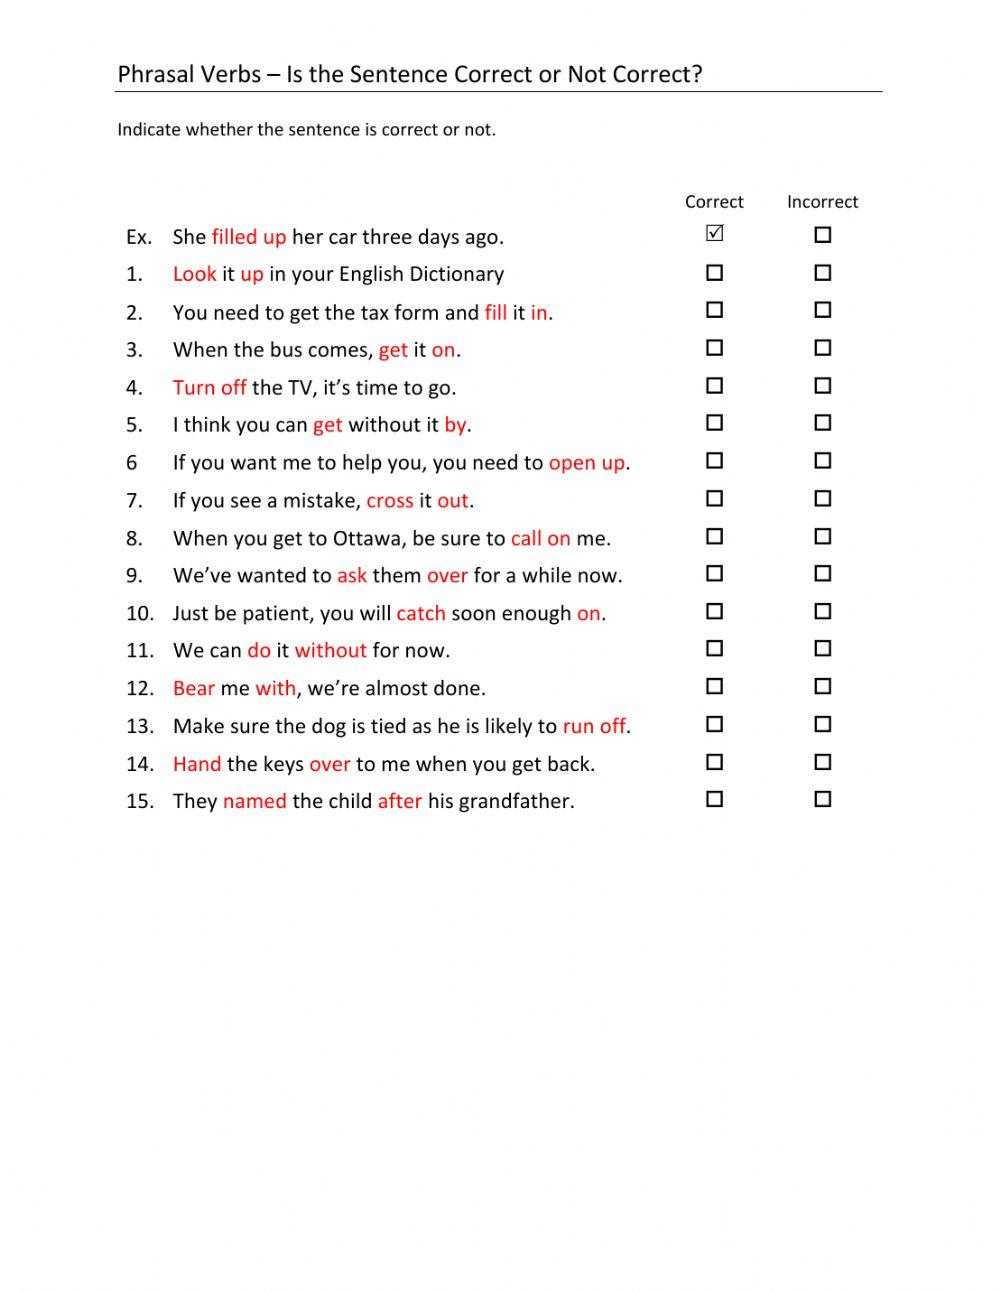 Are these Phrasal Verbs used correctly?